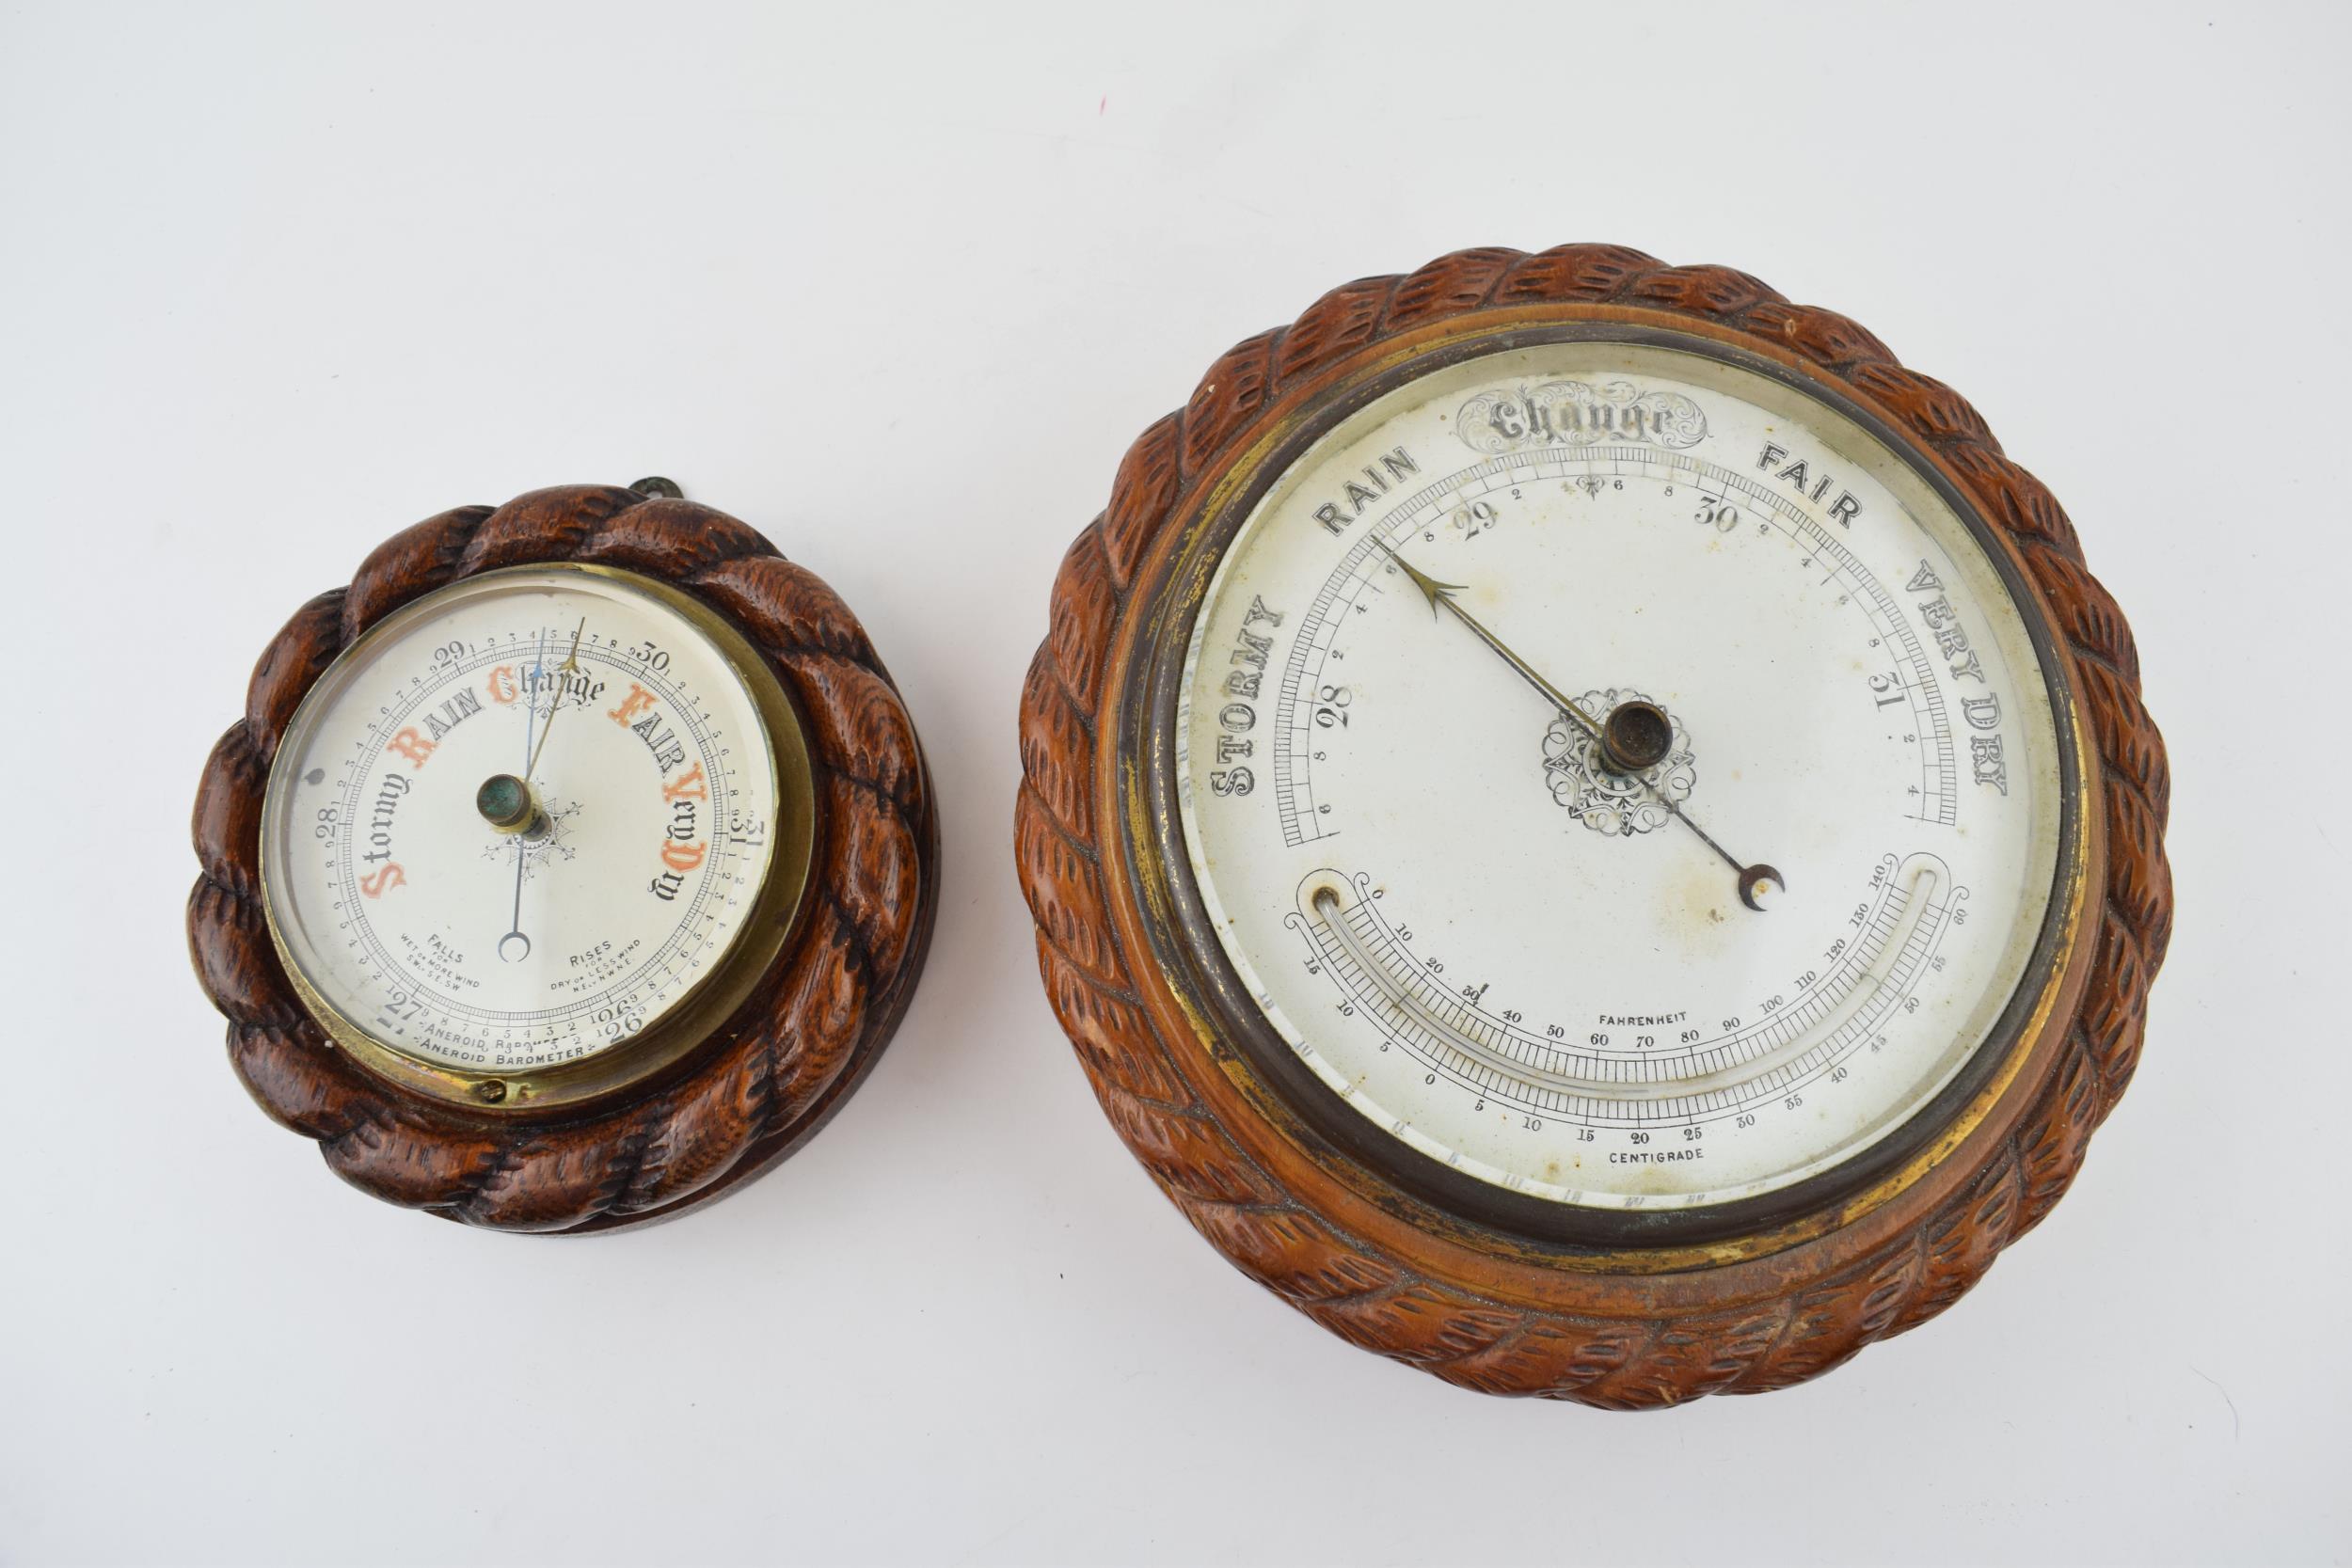 A barometer with intergrated thermometer. Golden oak case. White dial with brass hand. Diameter